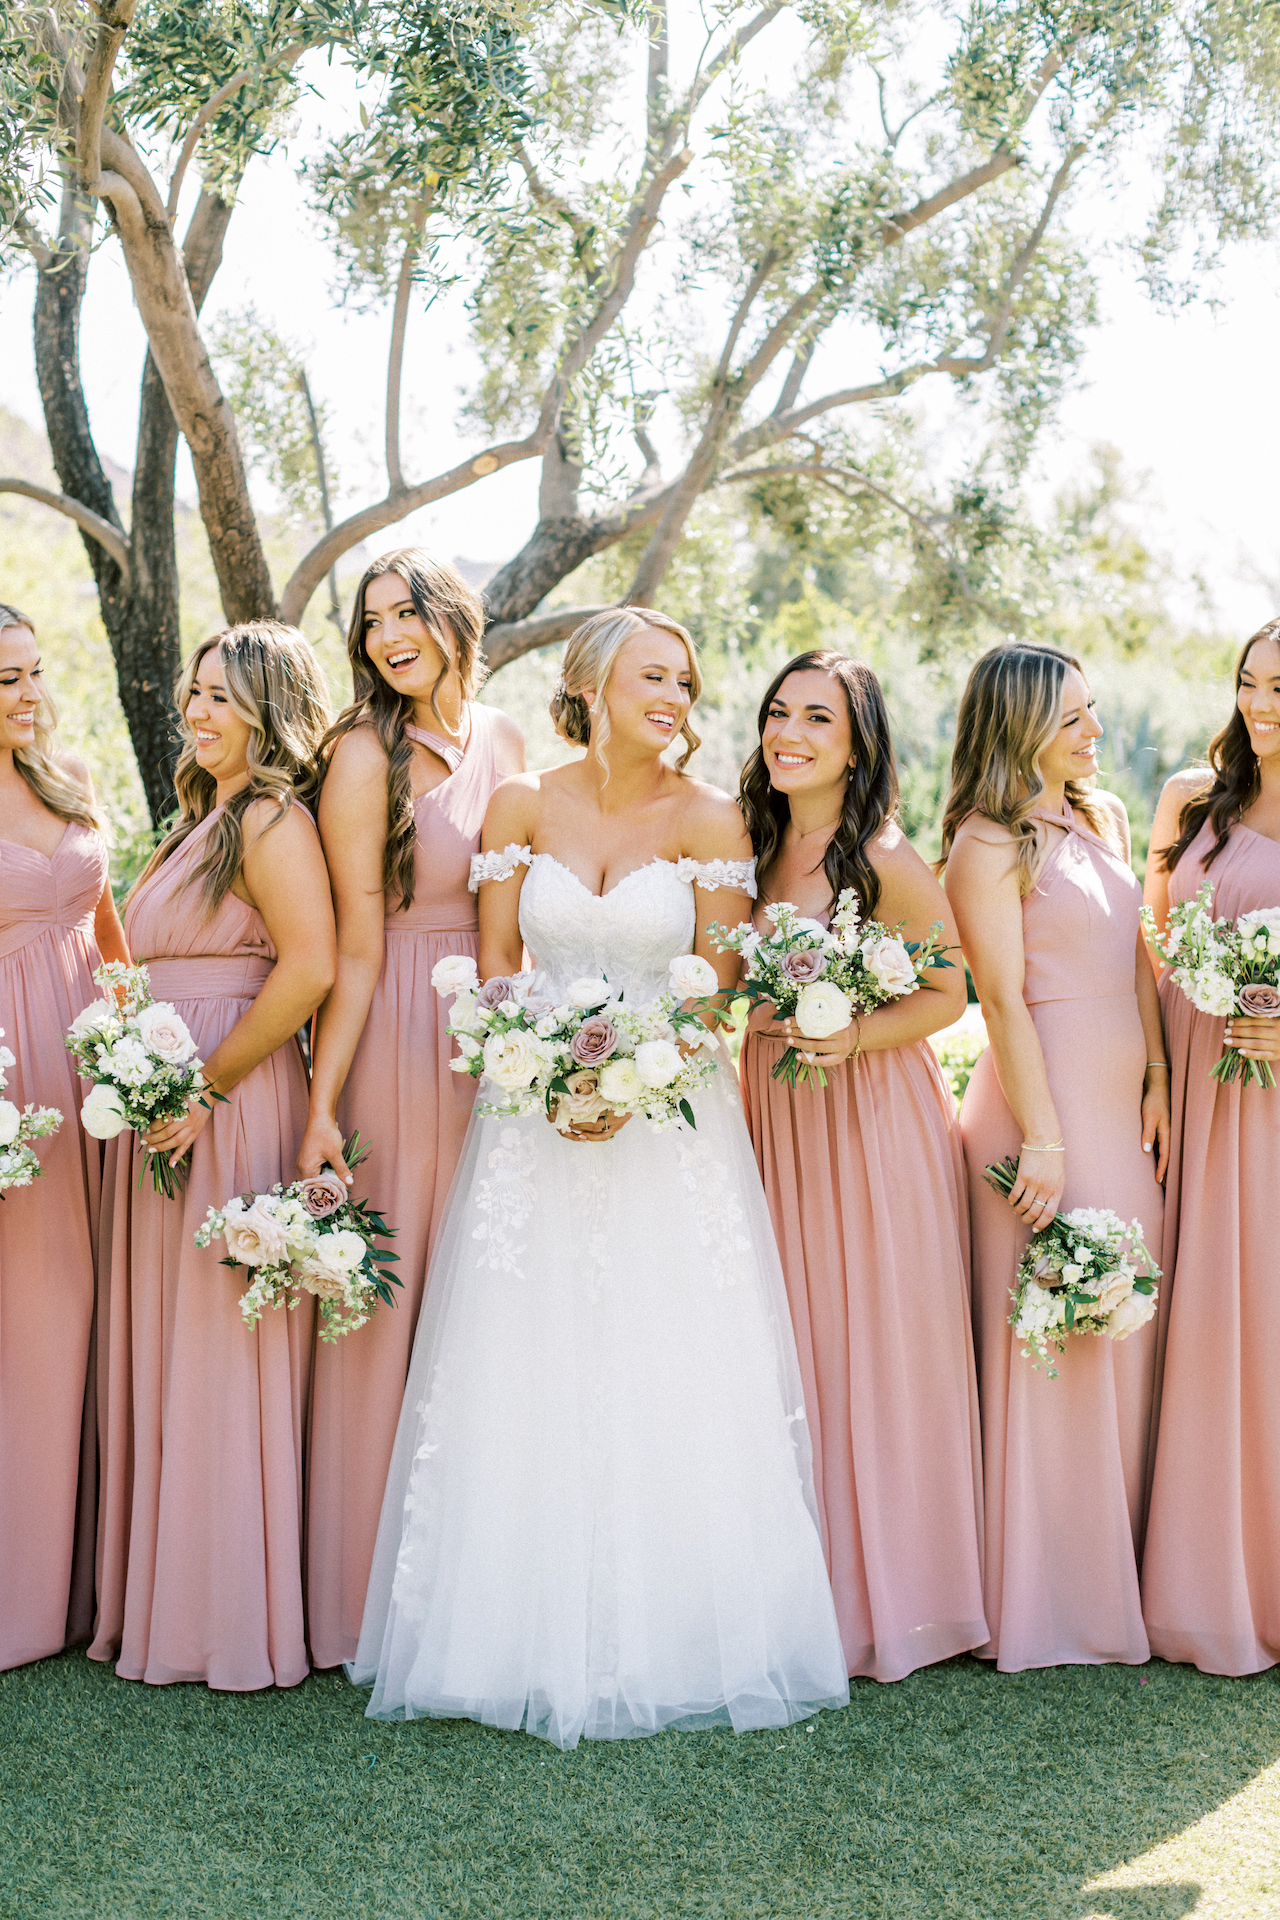 Bride standing in row with bridesmaids wearing blush bridesmaid dresses, all smiling.